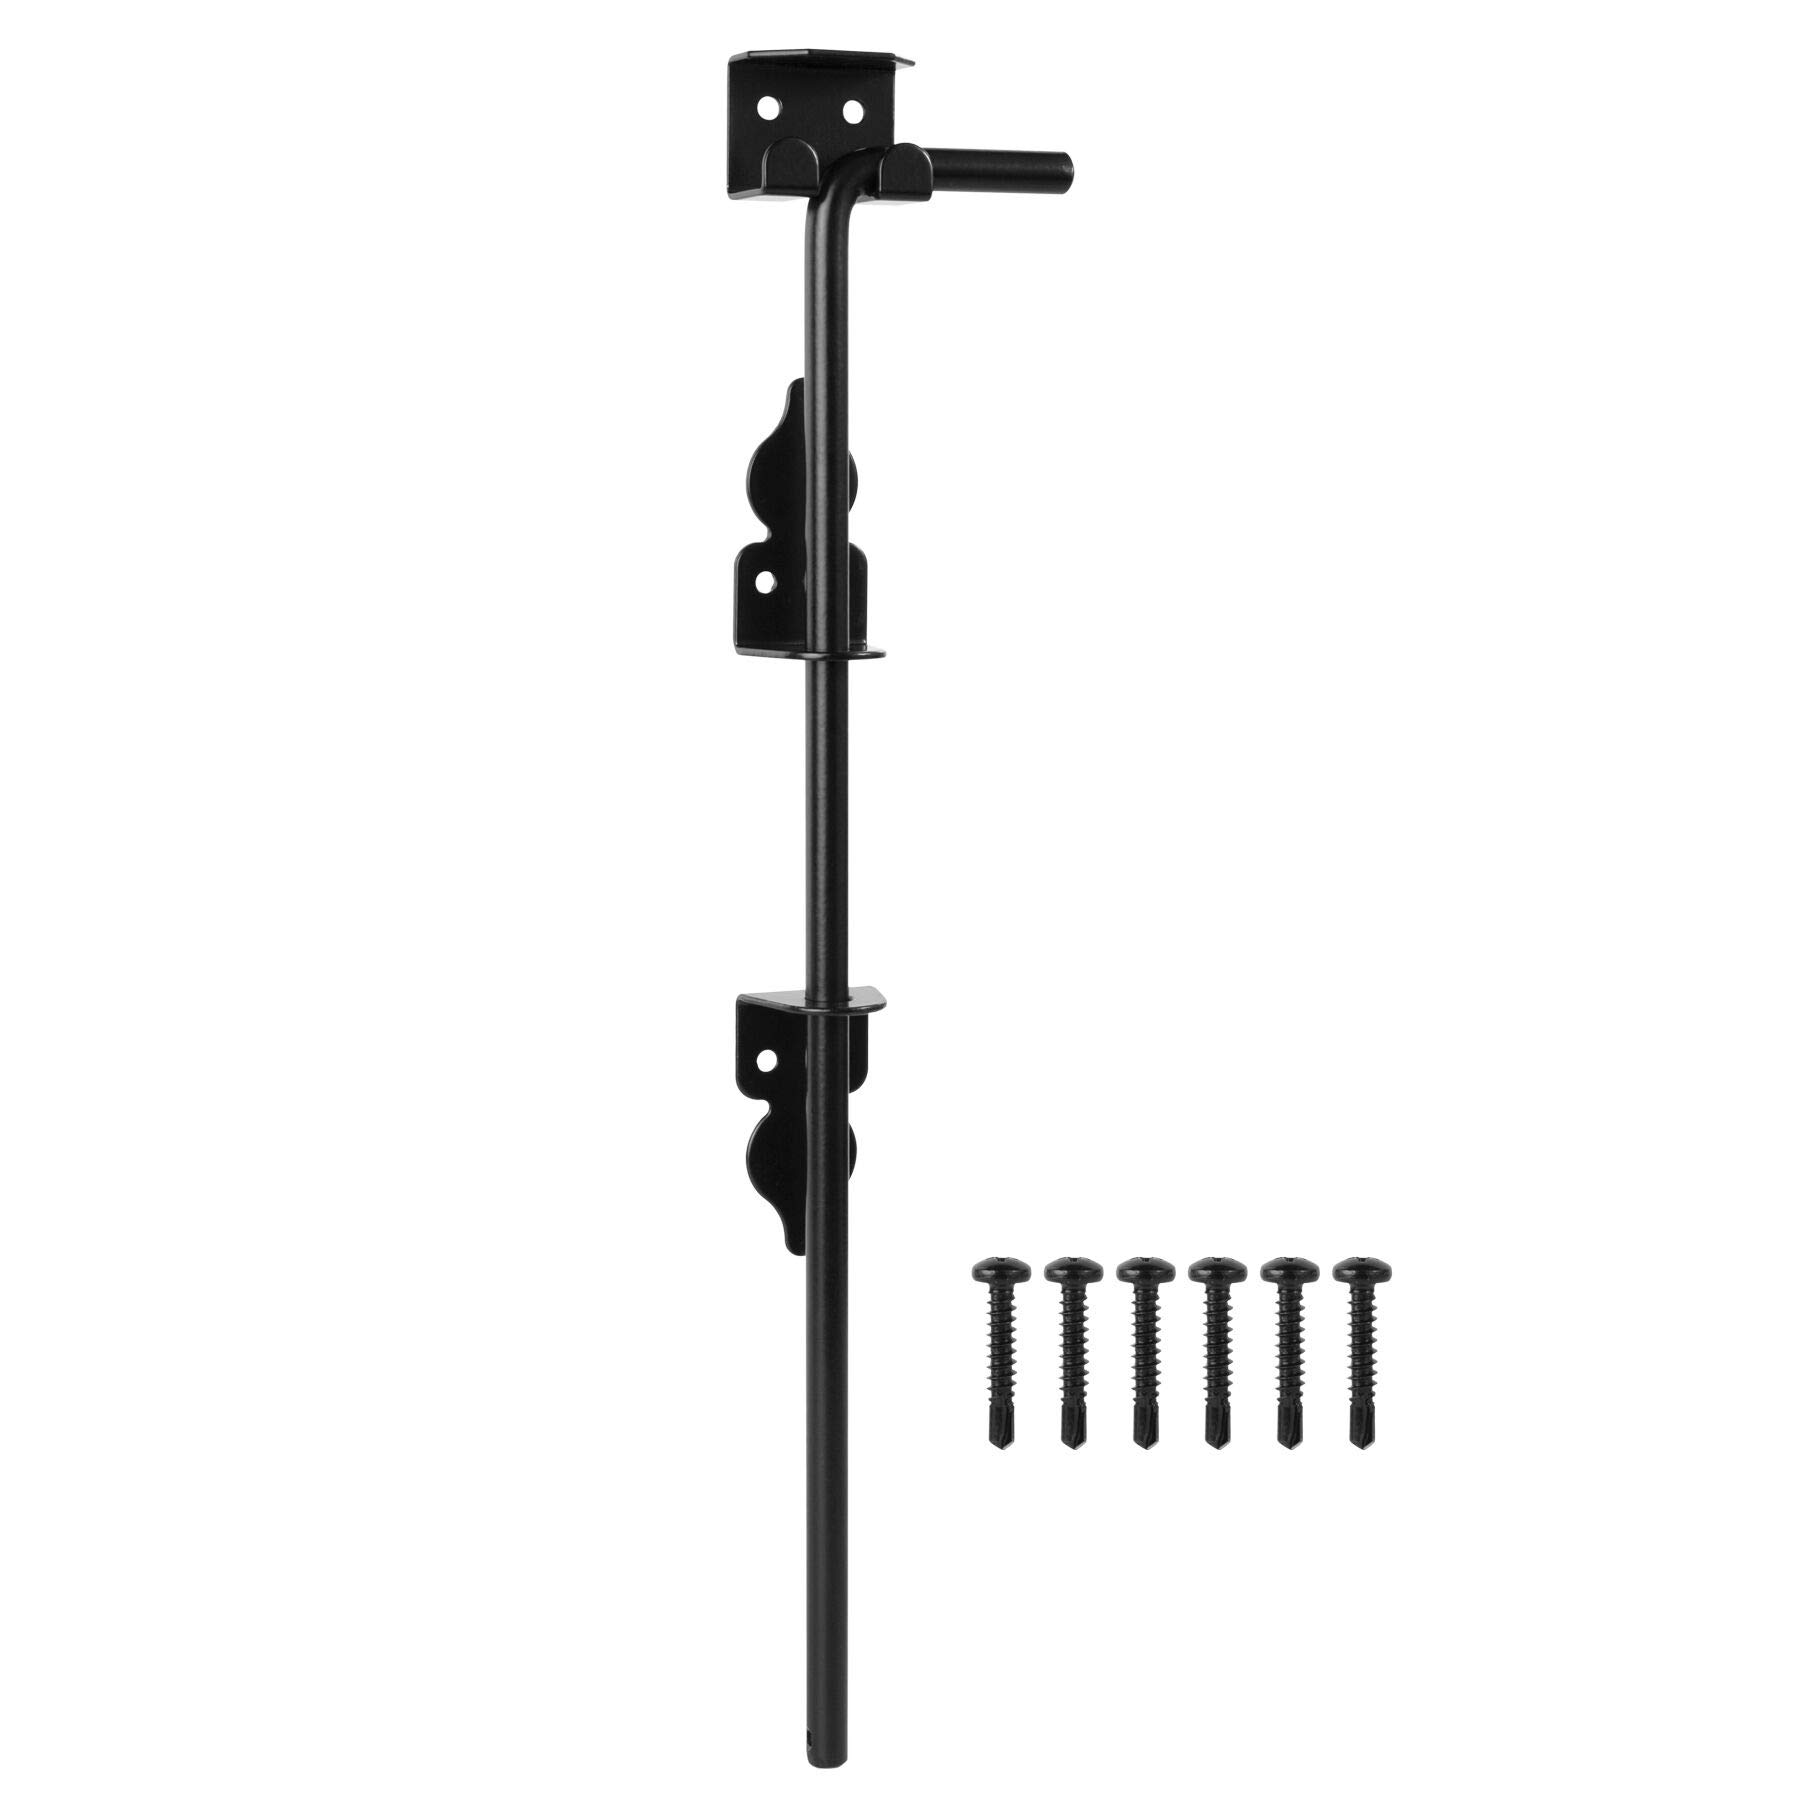 HILLMASTER 18" Heavy Duty Cane Bolt Gate Drop Rod for Wood Fence, Steel Drop Bolts Cane Bolt Hardware for Wooden Gater and Holdi